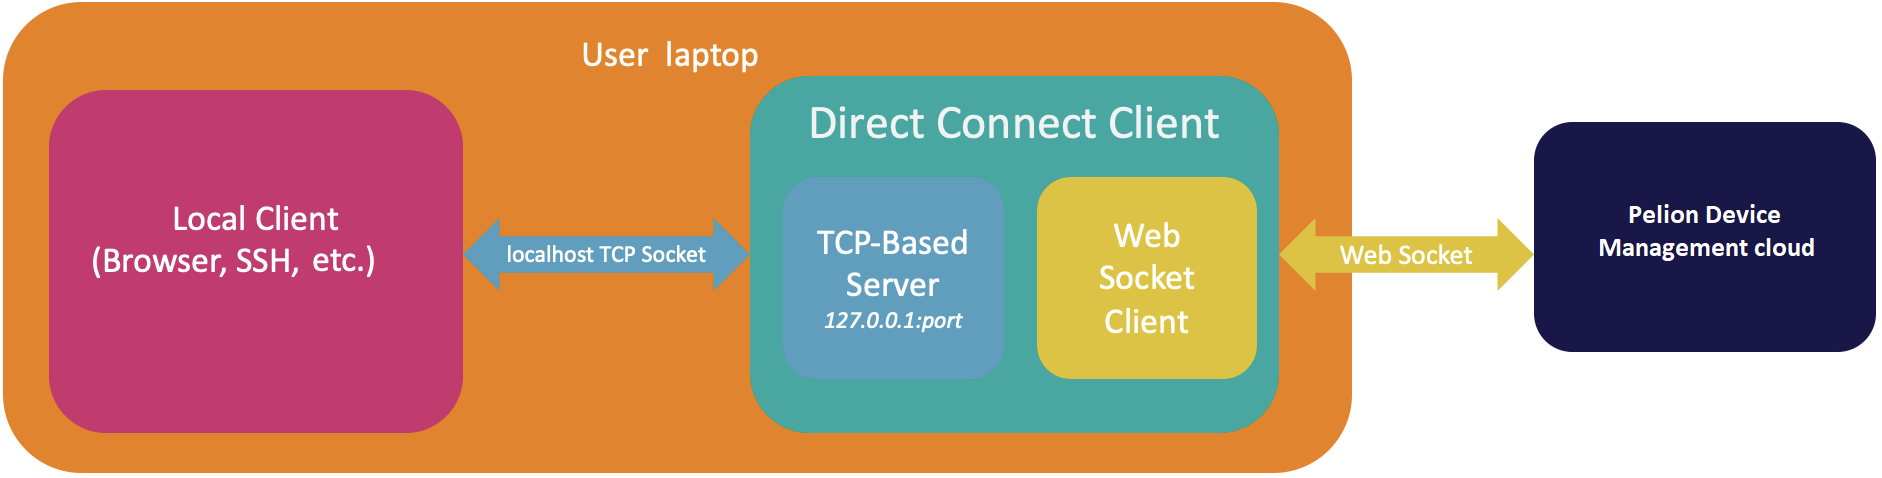 direct-connect-client-overview